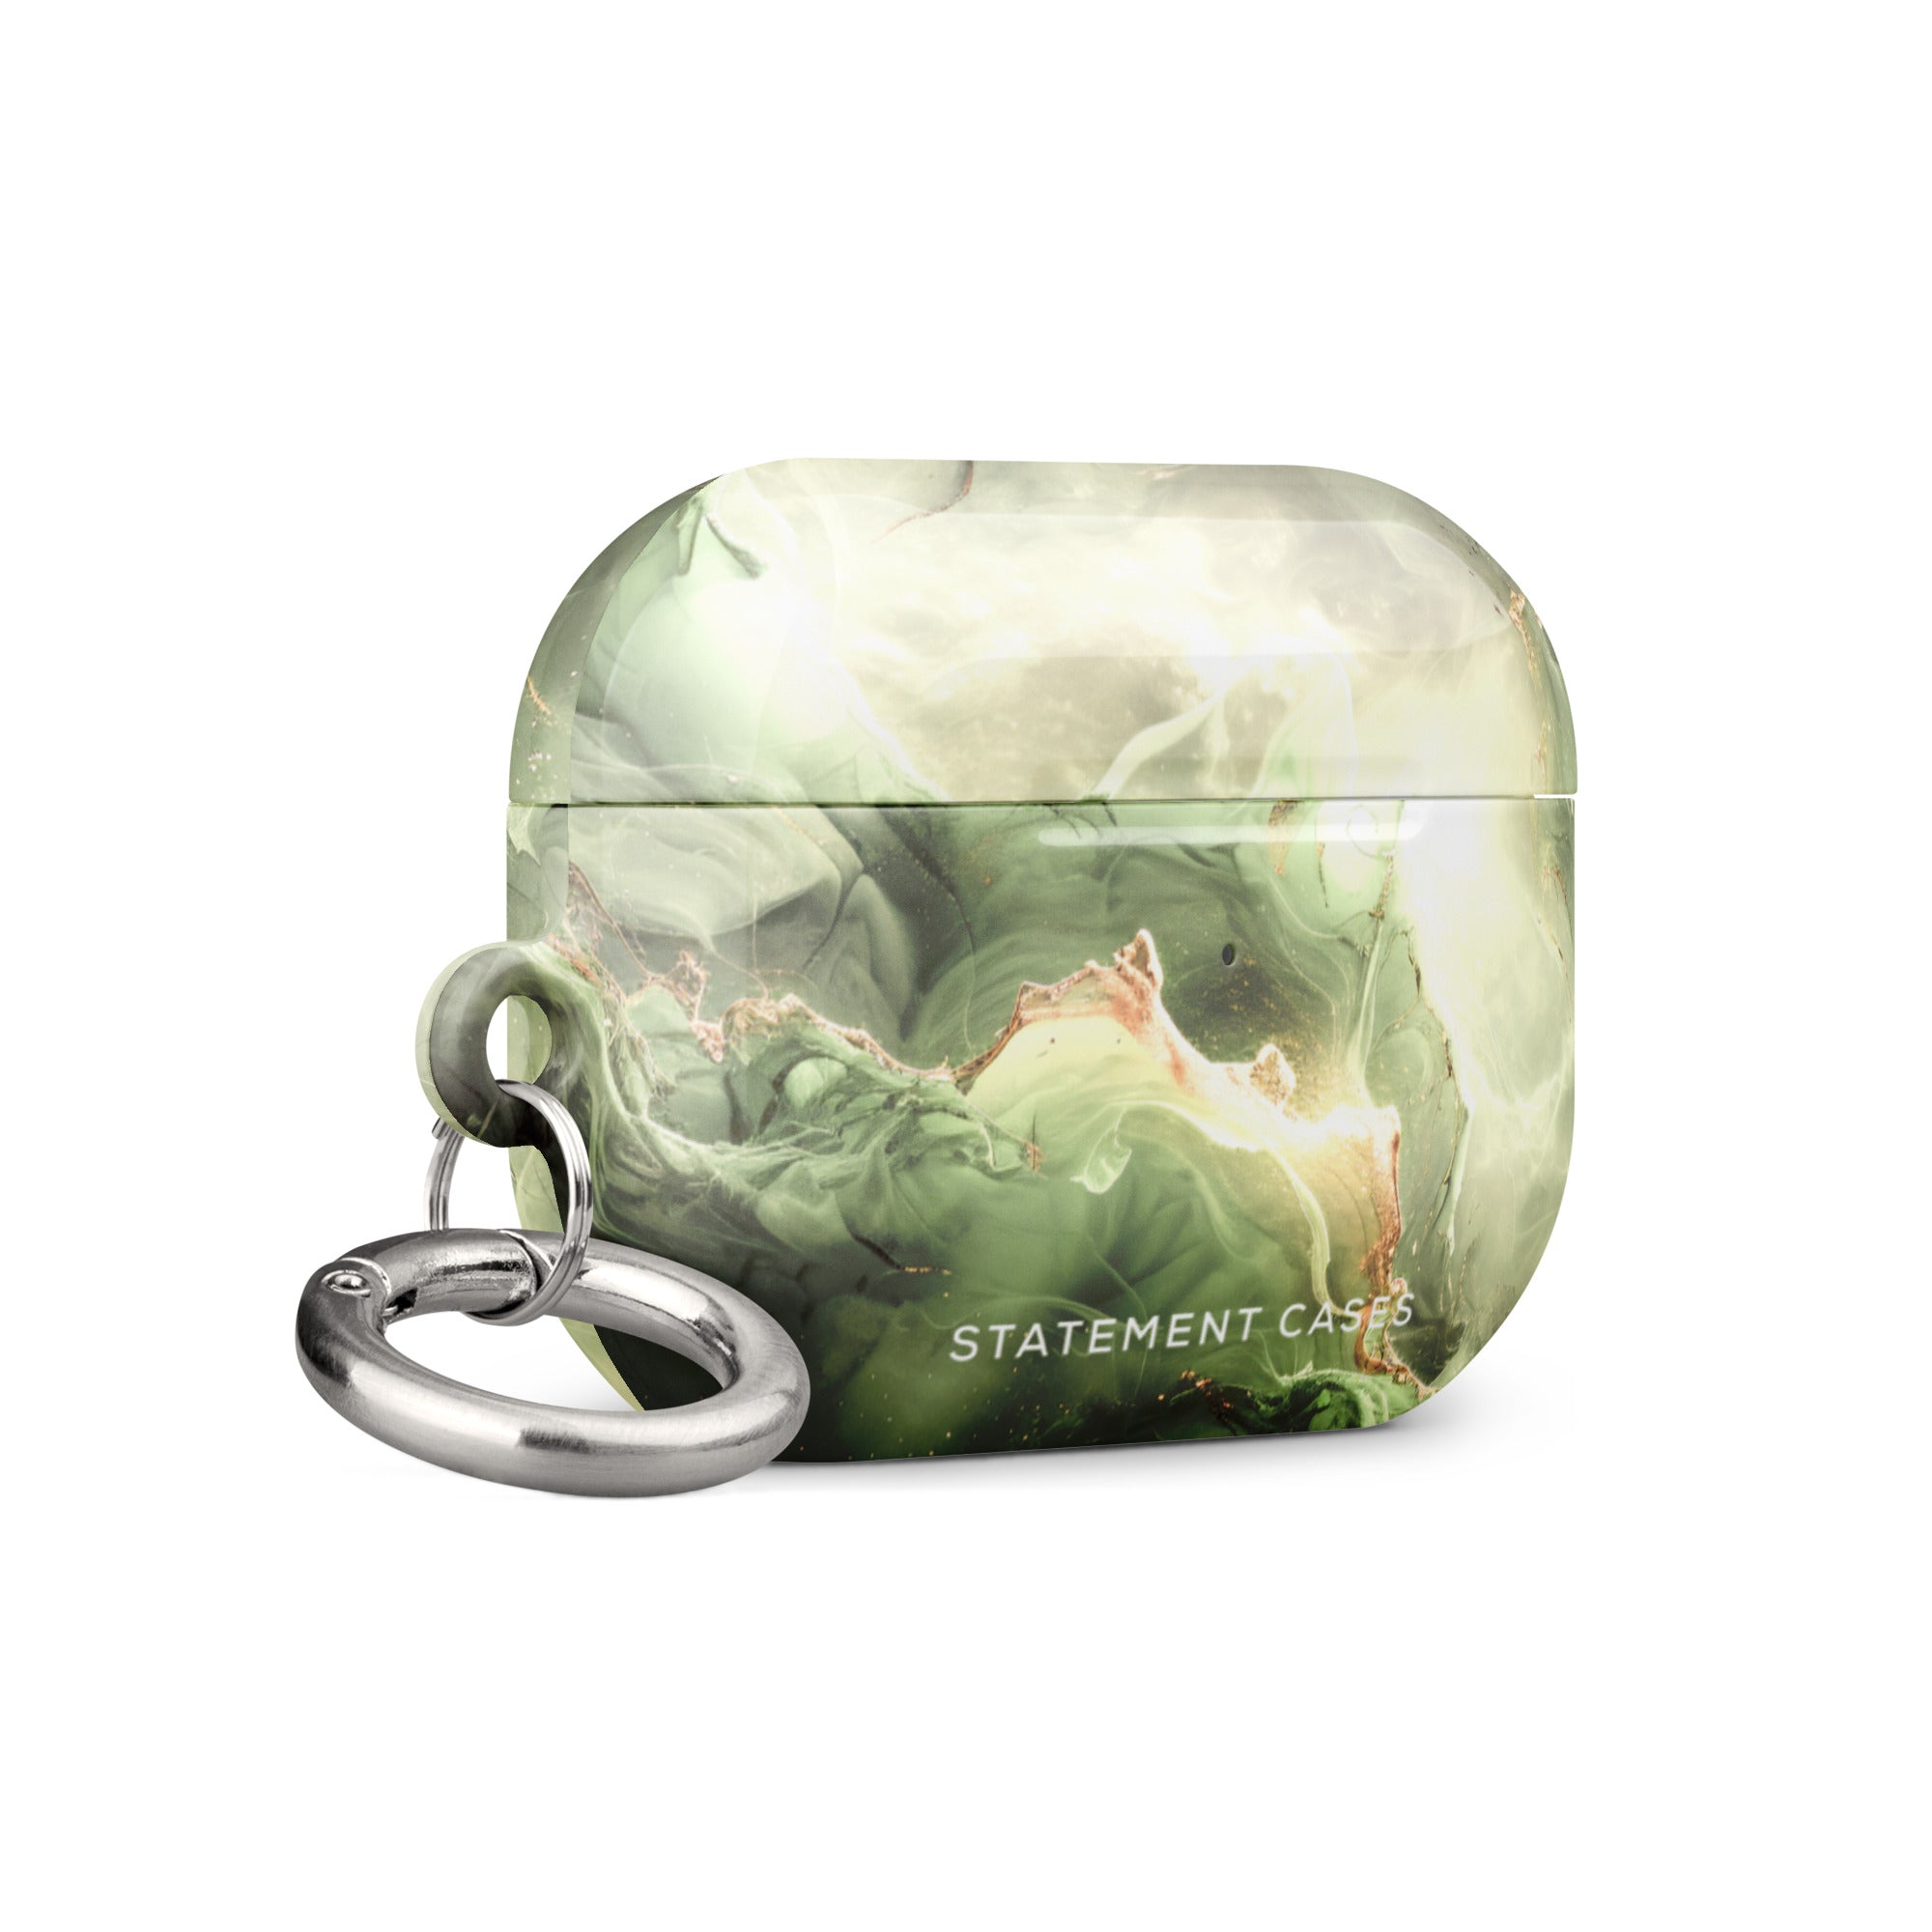 A **Sleek Sage for AirPods Pro Gen 2** with a glossy marbled design in shades of green and white, accented with gold streaks. The case features an impact-absorbing build, a silver keyring on the side, and the brand name "Statement Cases" printed at the bottom.